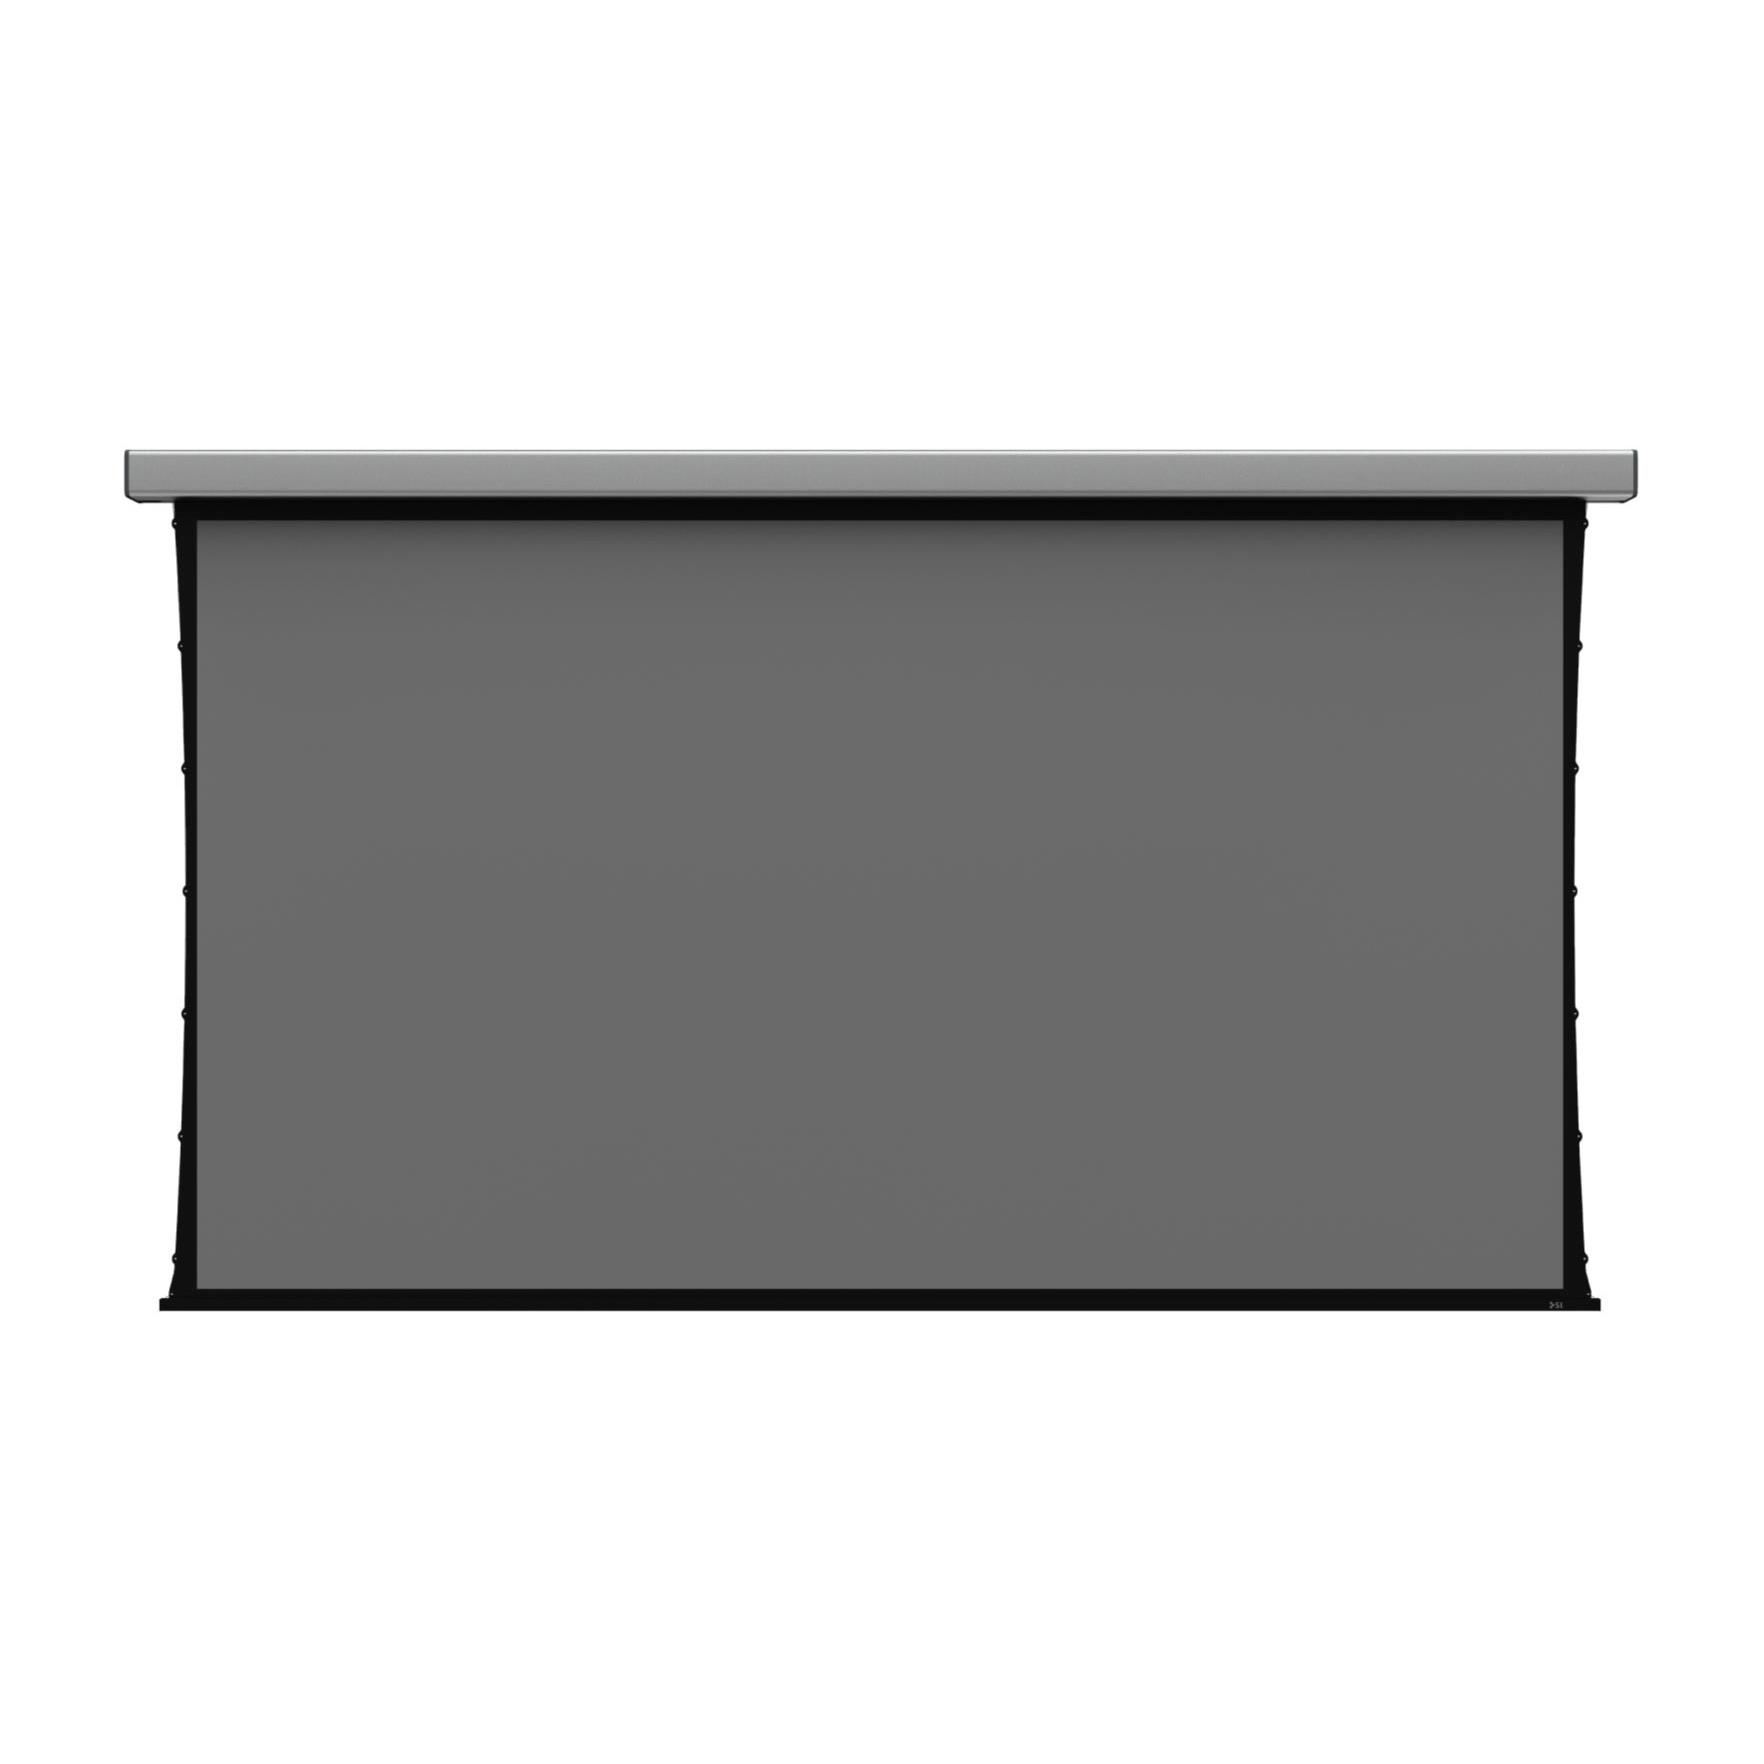 PSE119AG Matte Grey eGALAXY® 119 inch 16:9 Electric/Motorized Projector Screen